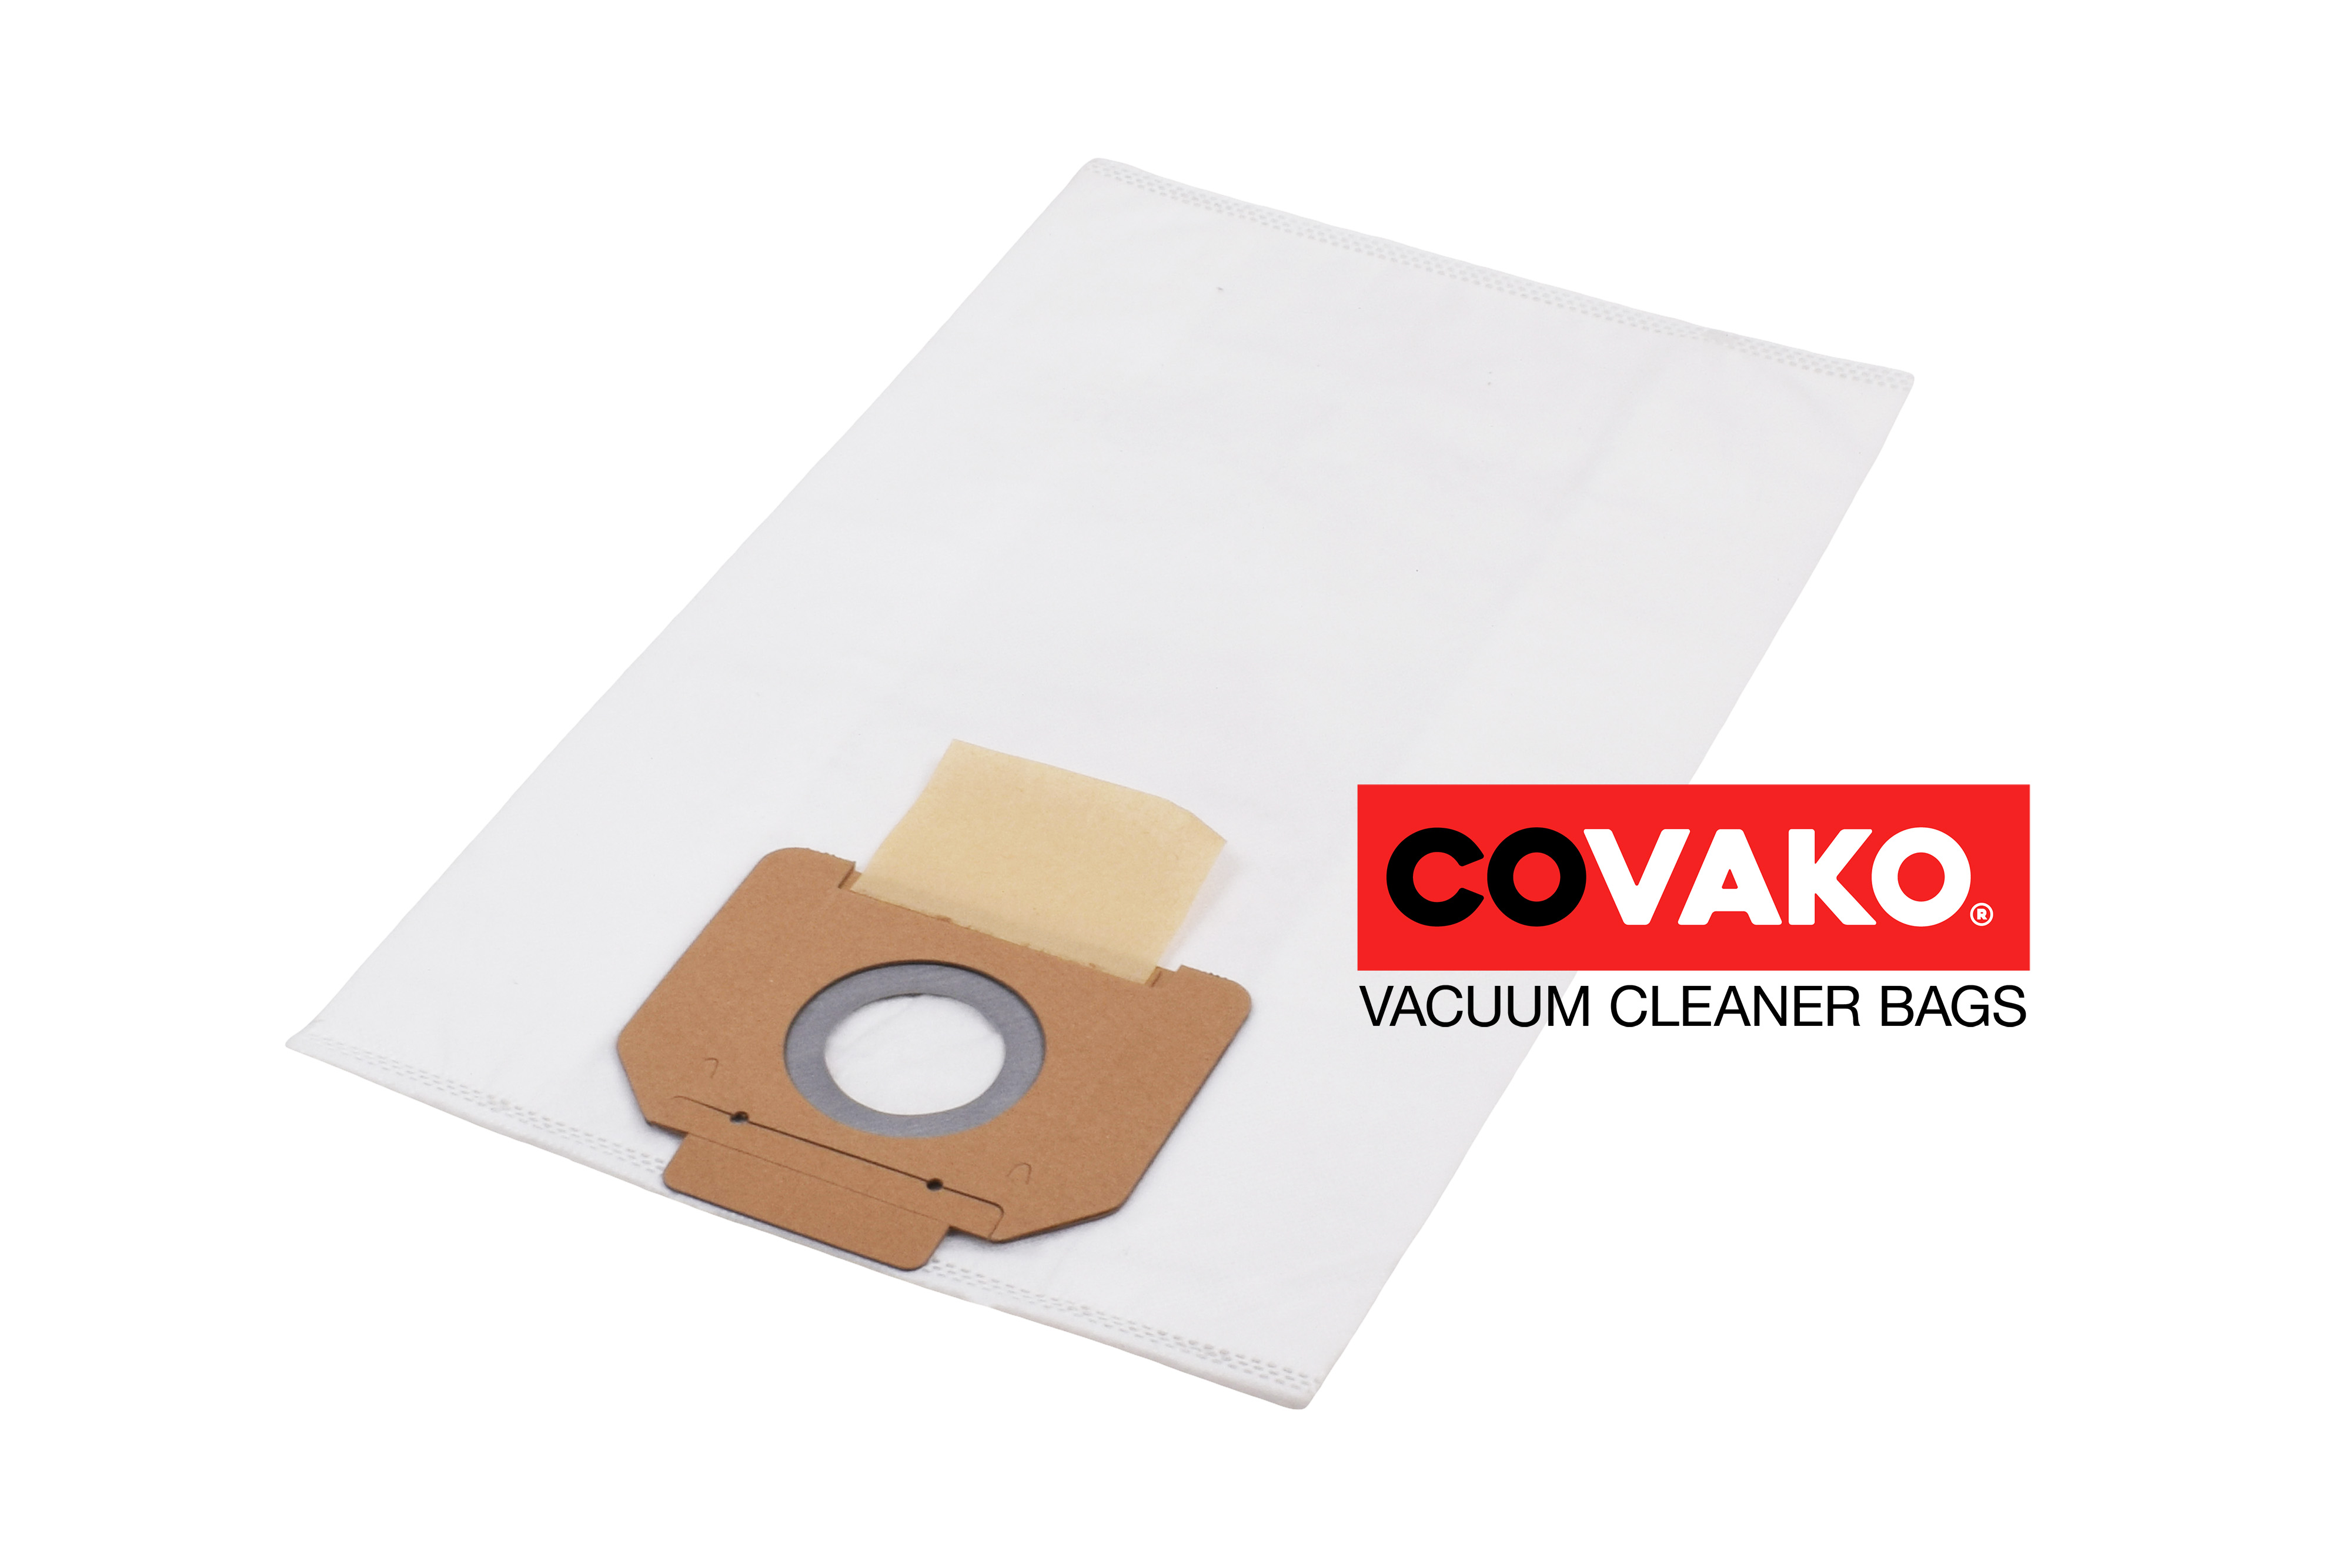 Gansow YP 1/20 W&D / Synthesis - Gansow vacuum cleaner bags